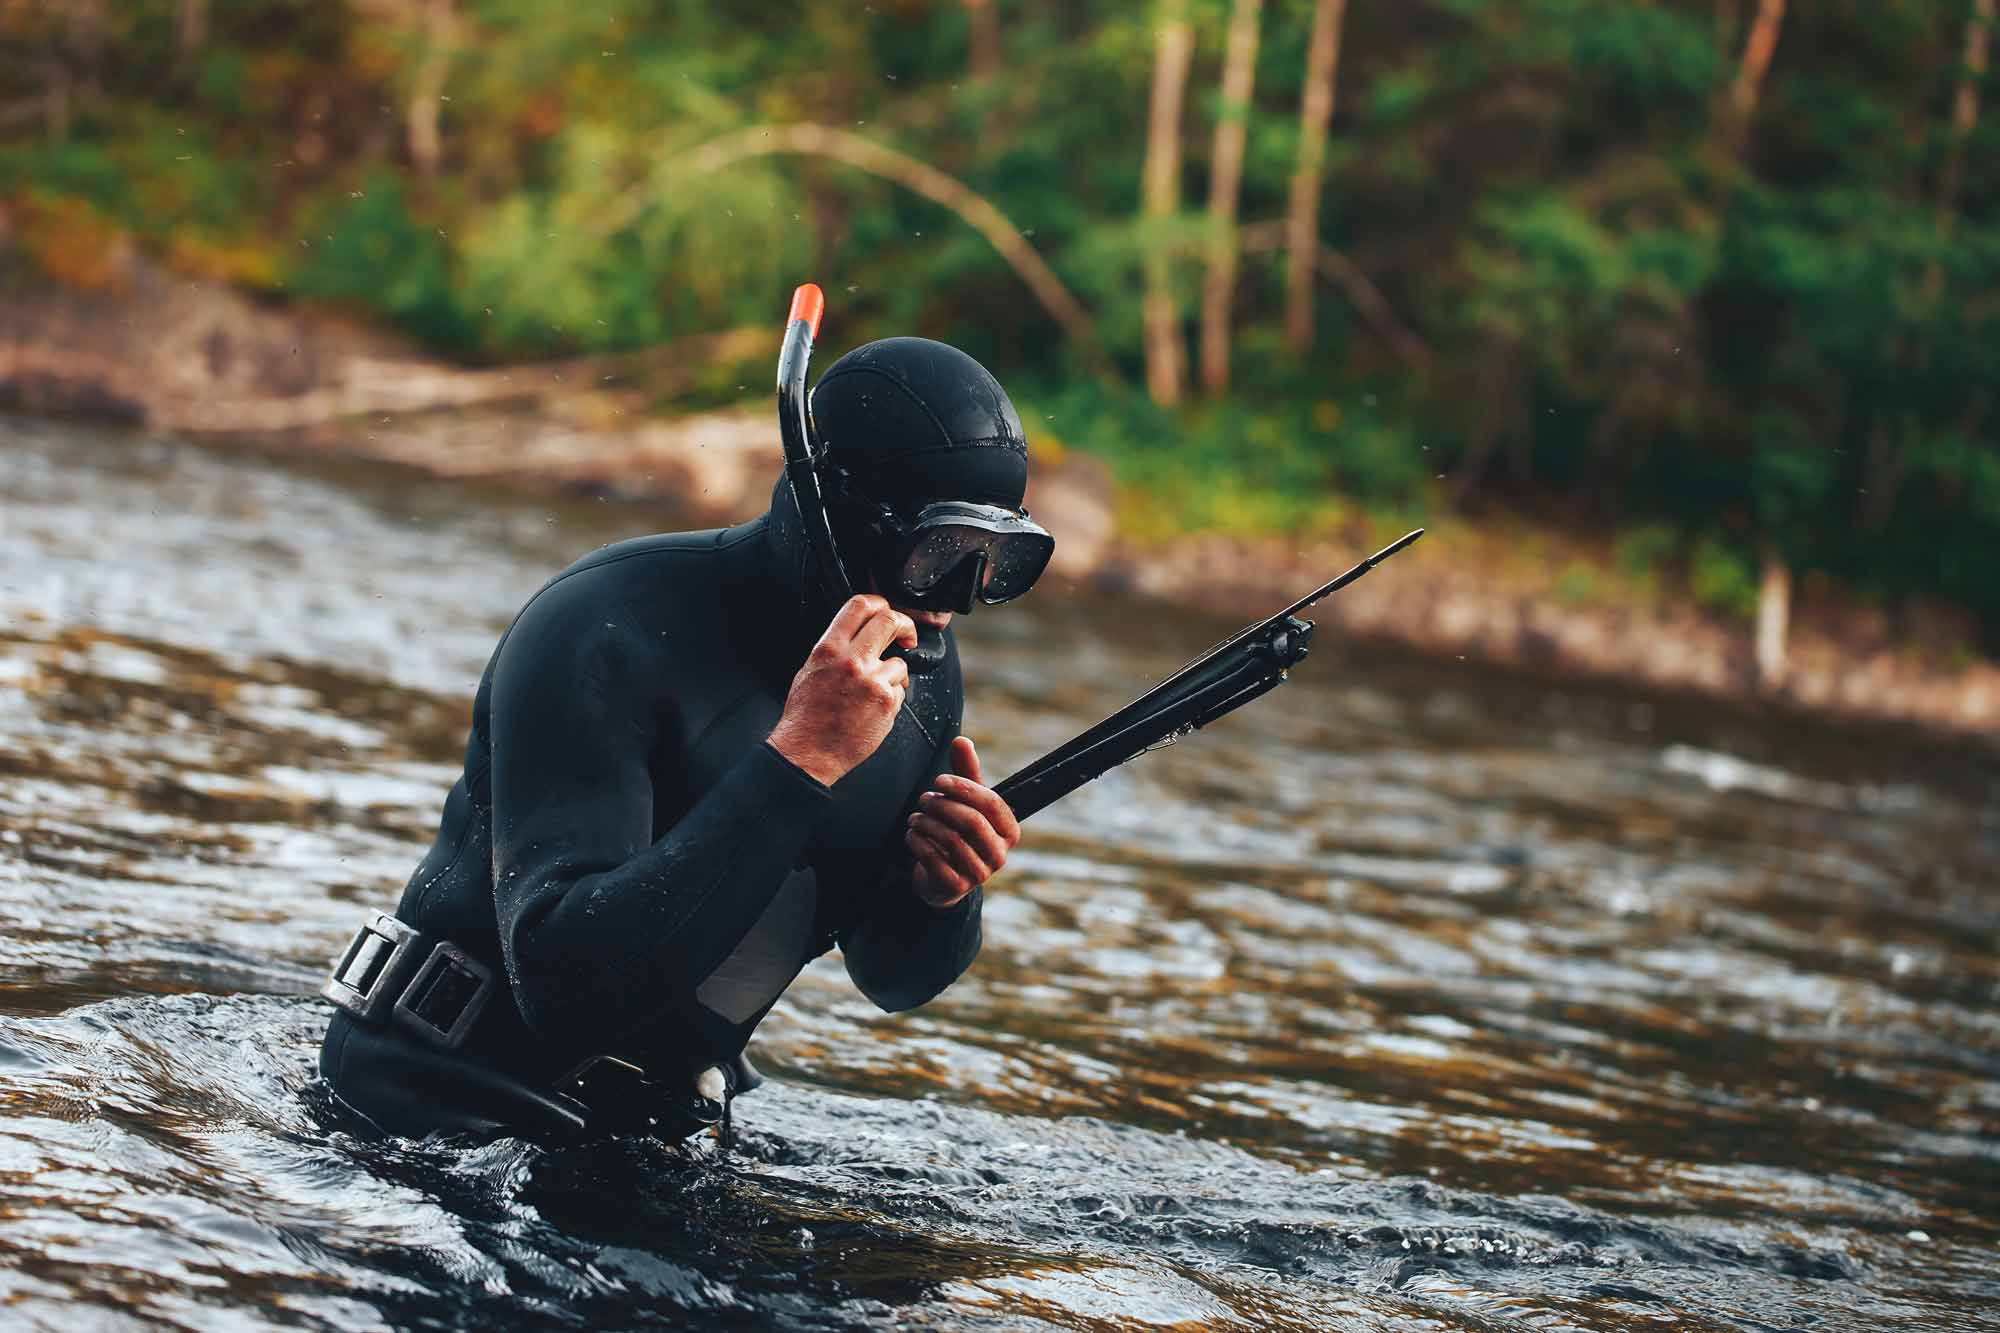 Spearfishing Gear The Essentials You’ll Need this Summer